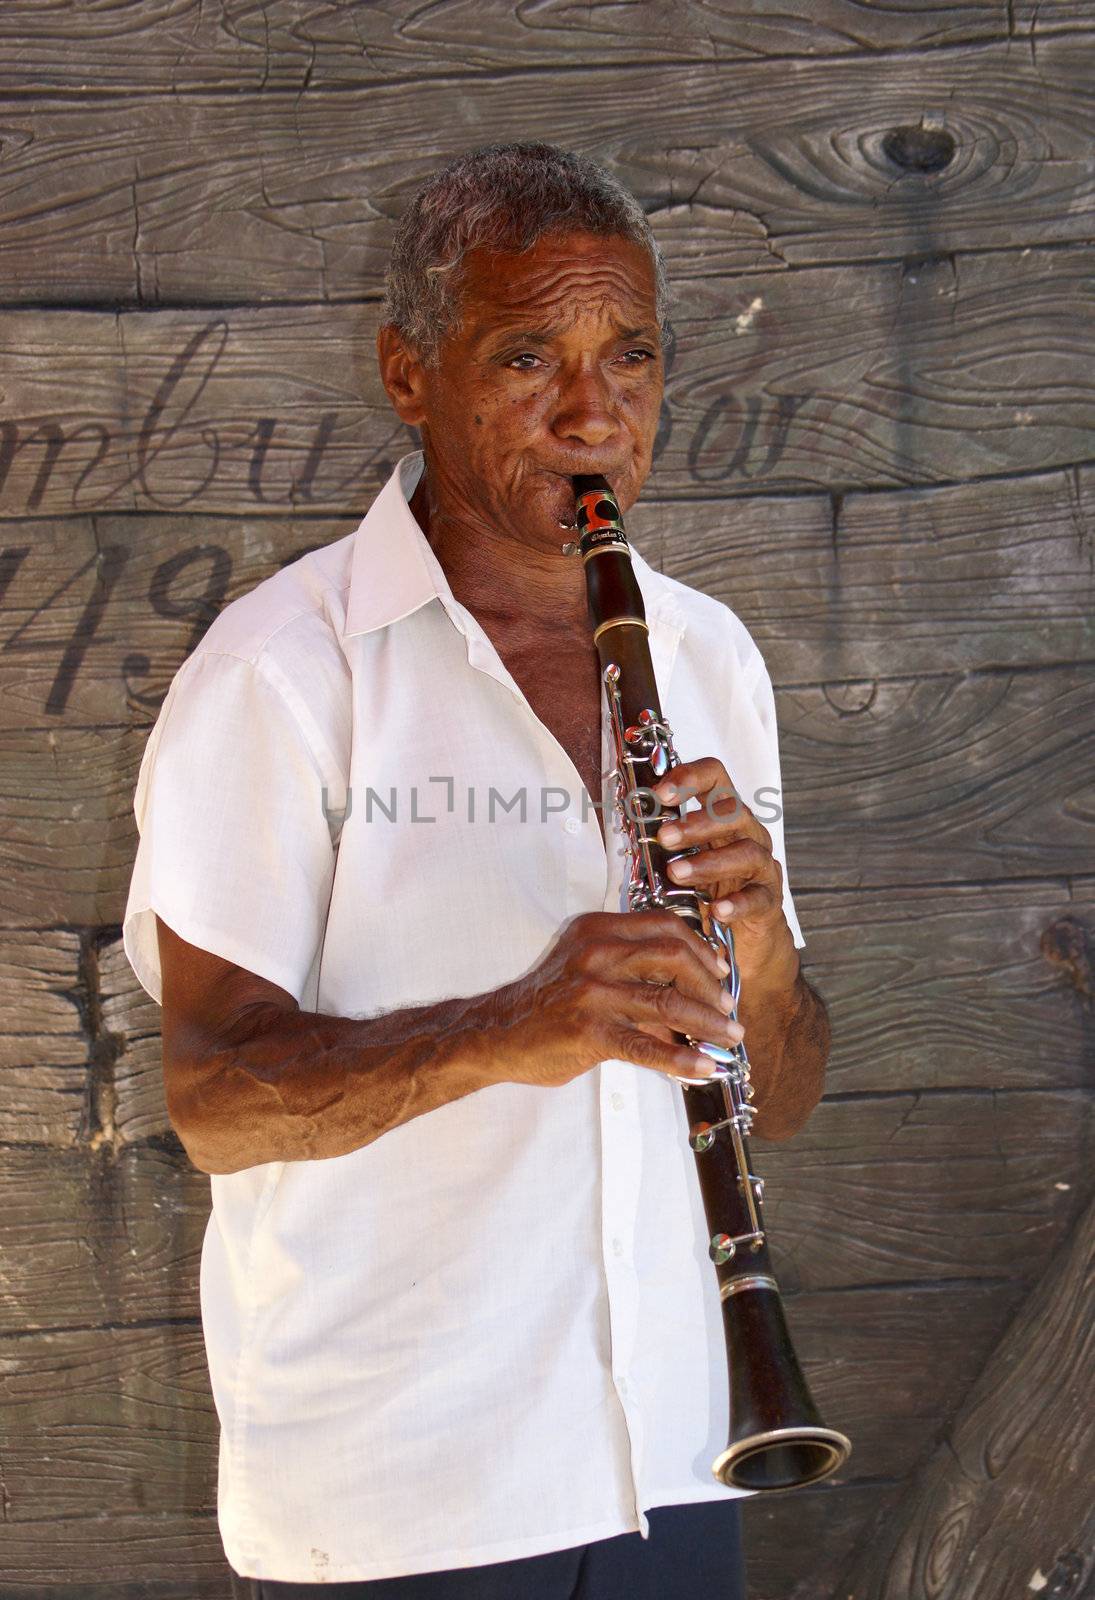 An elderly Cuban man is playing the clarinet in front of a boat at Guardalavaca, Cuba on October 11, 2010.